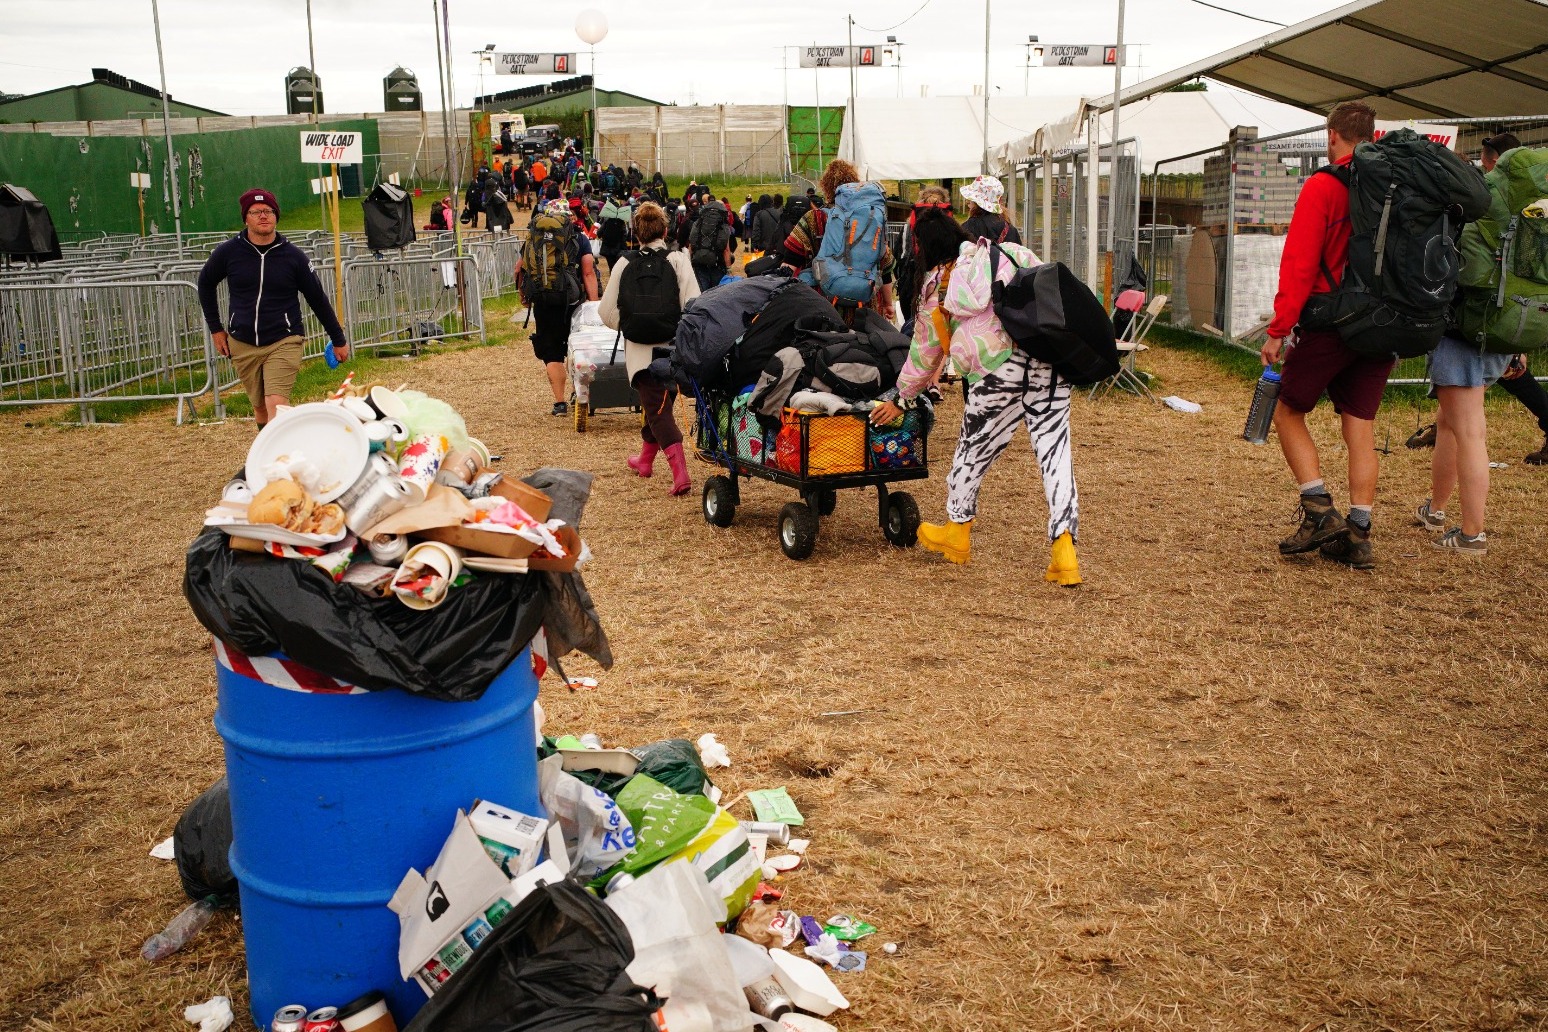 Glastonbury clean-up crew kick into action after sun-soaked festival 